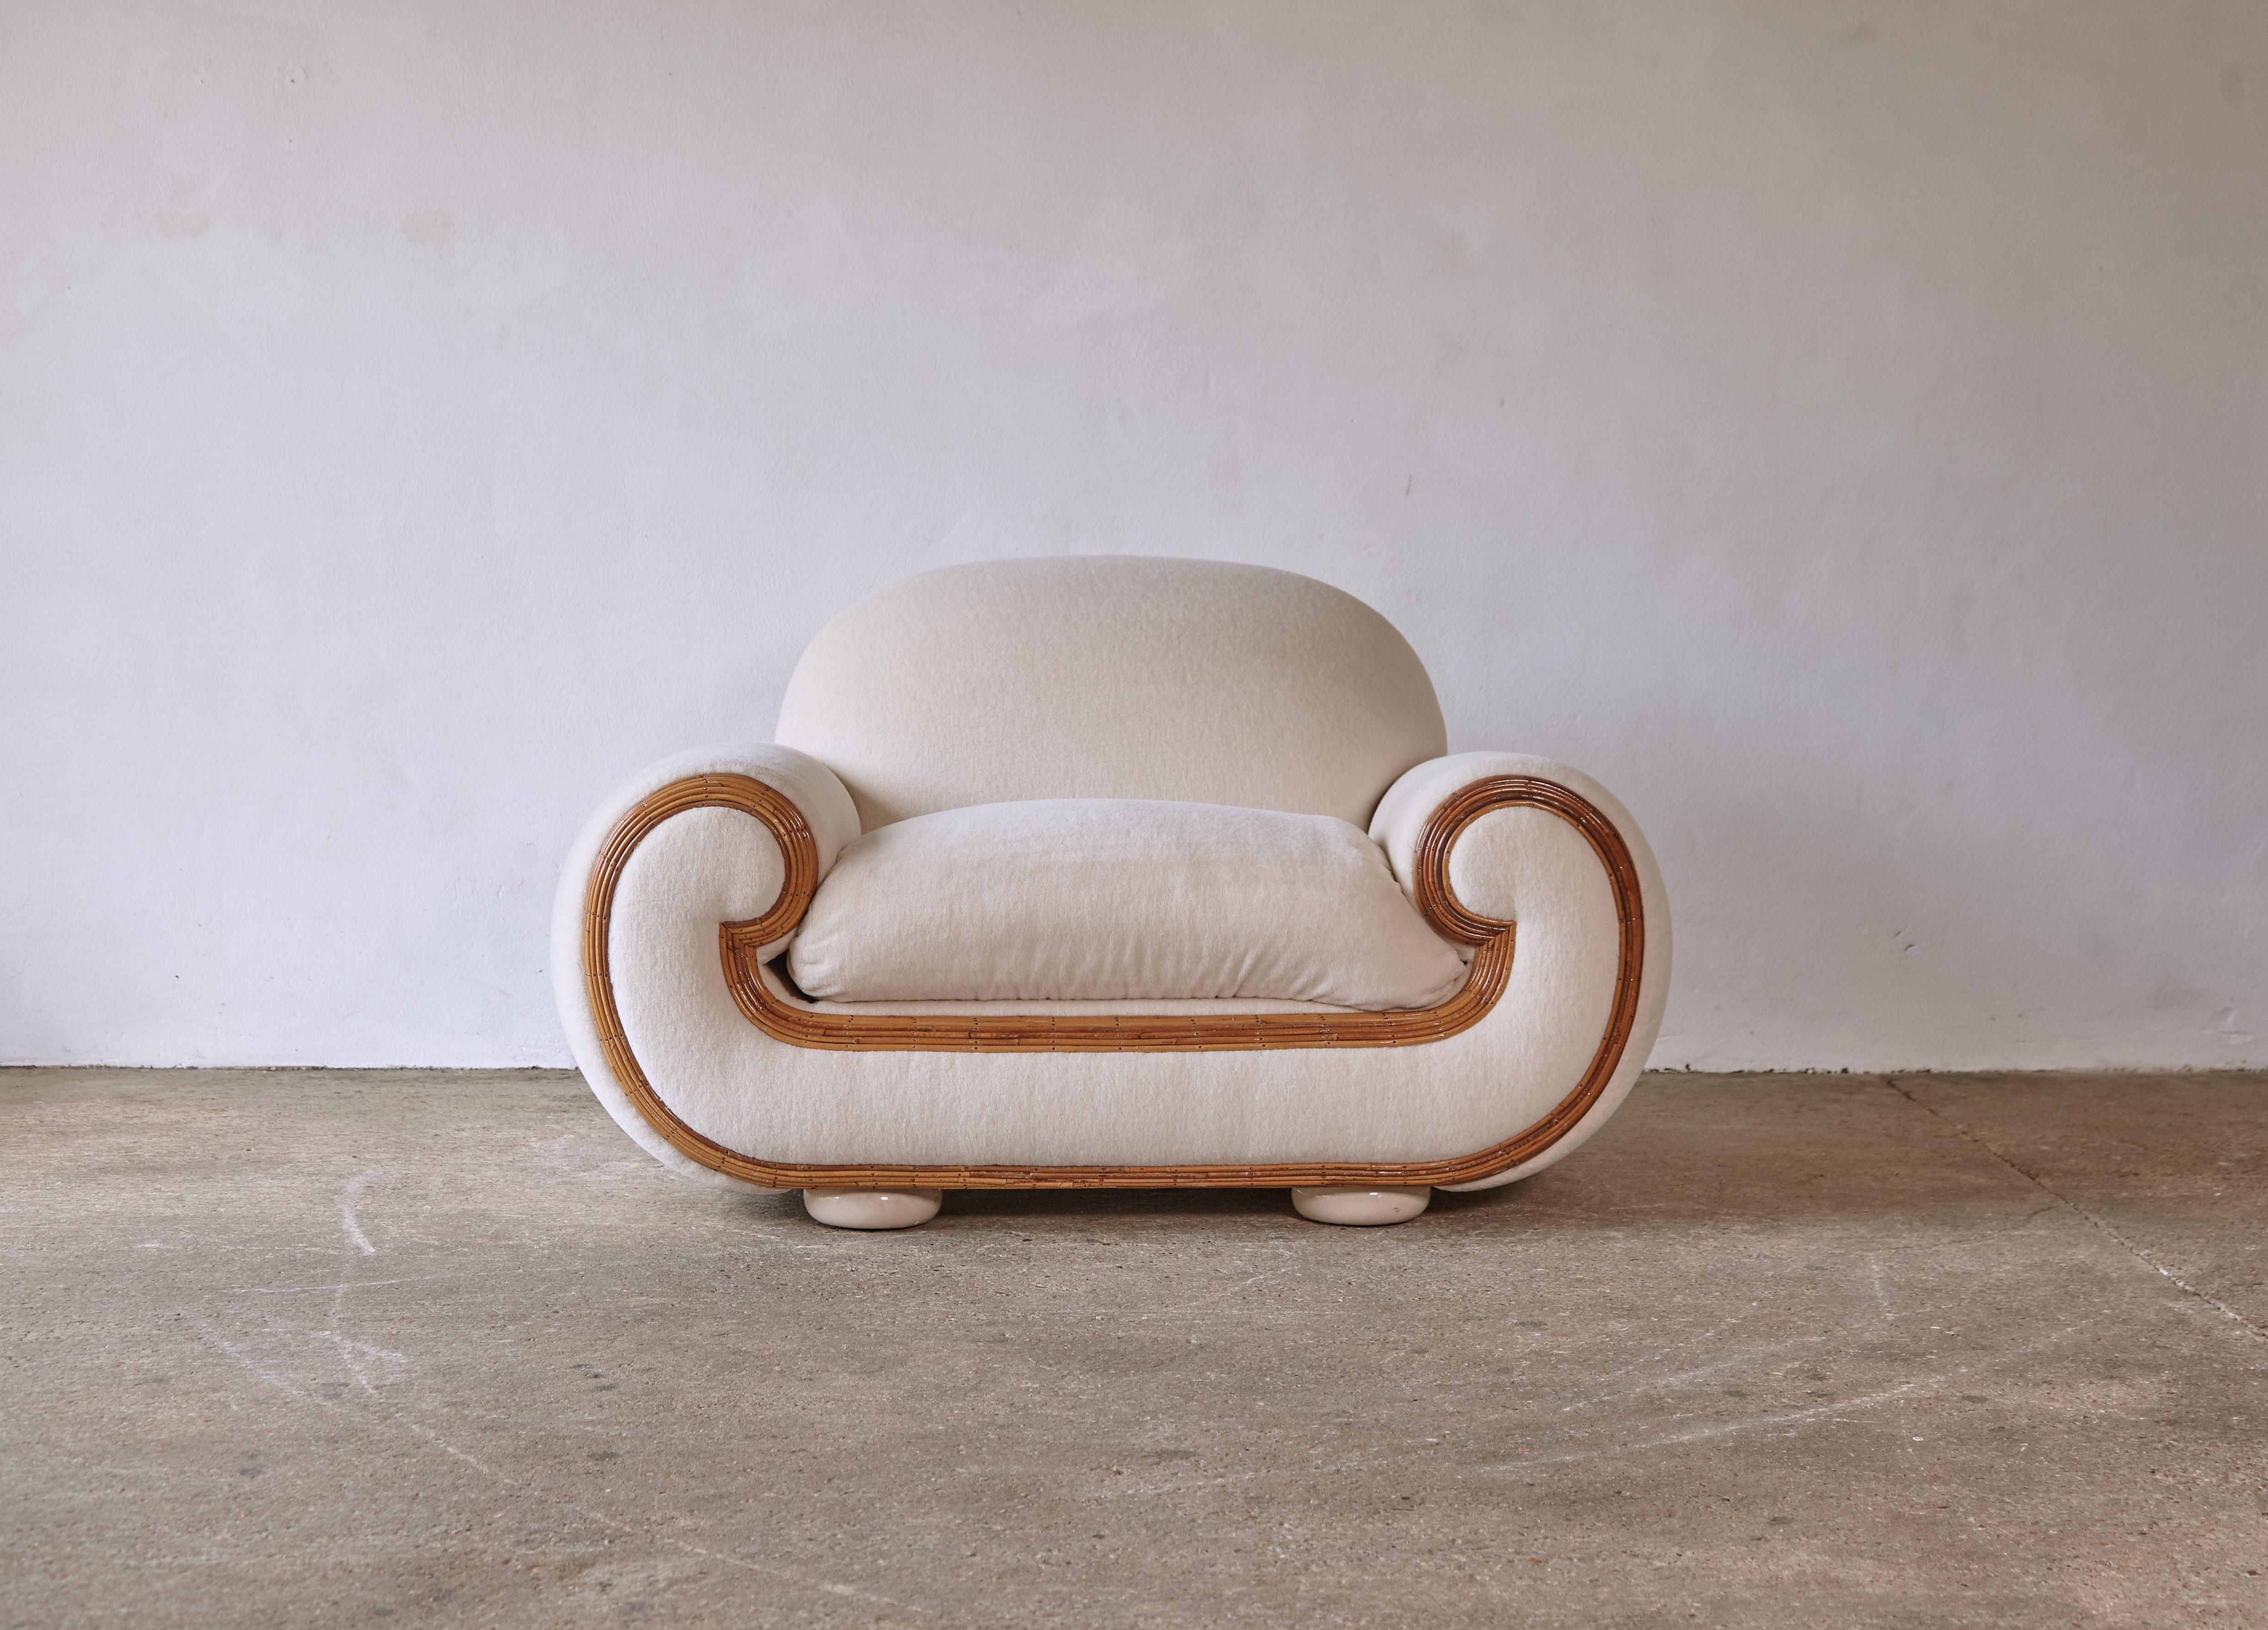 A huge, rare, oversized Vivai del Sud armchair / loveseat, Italy, 1970s/80s. Newly upholstered in a premium, cream, 100% Alpaca fabric. A really fun piece - please check the dimensions as this chair is big. Ships worldwide.

